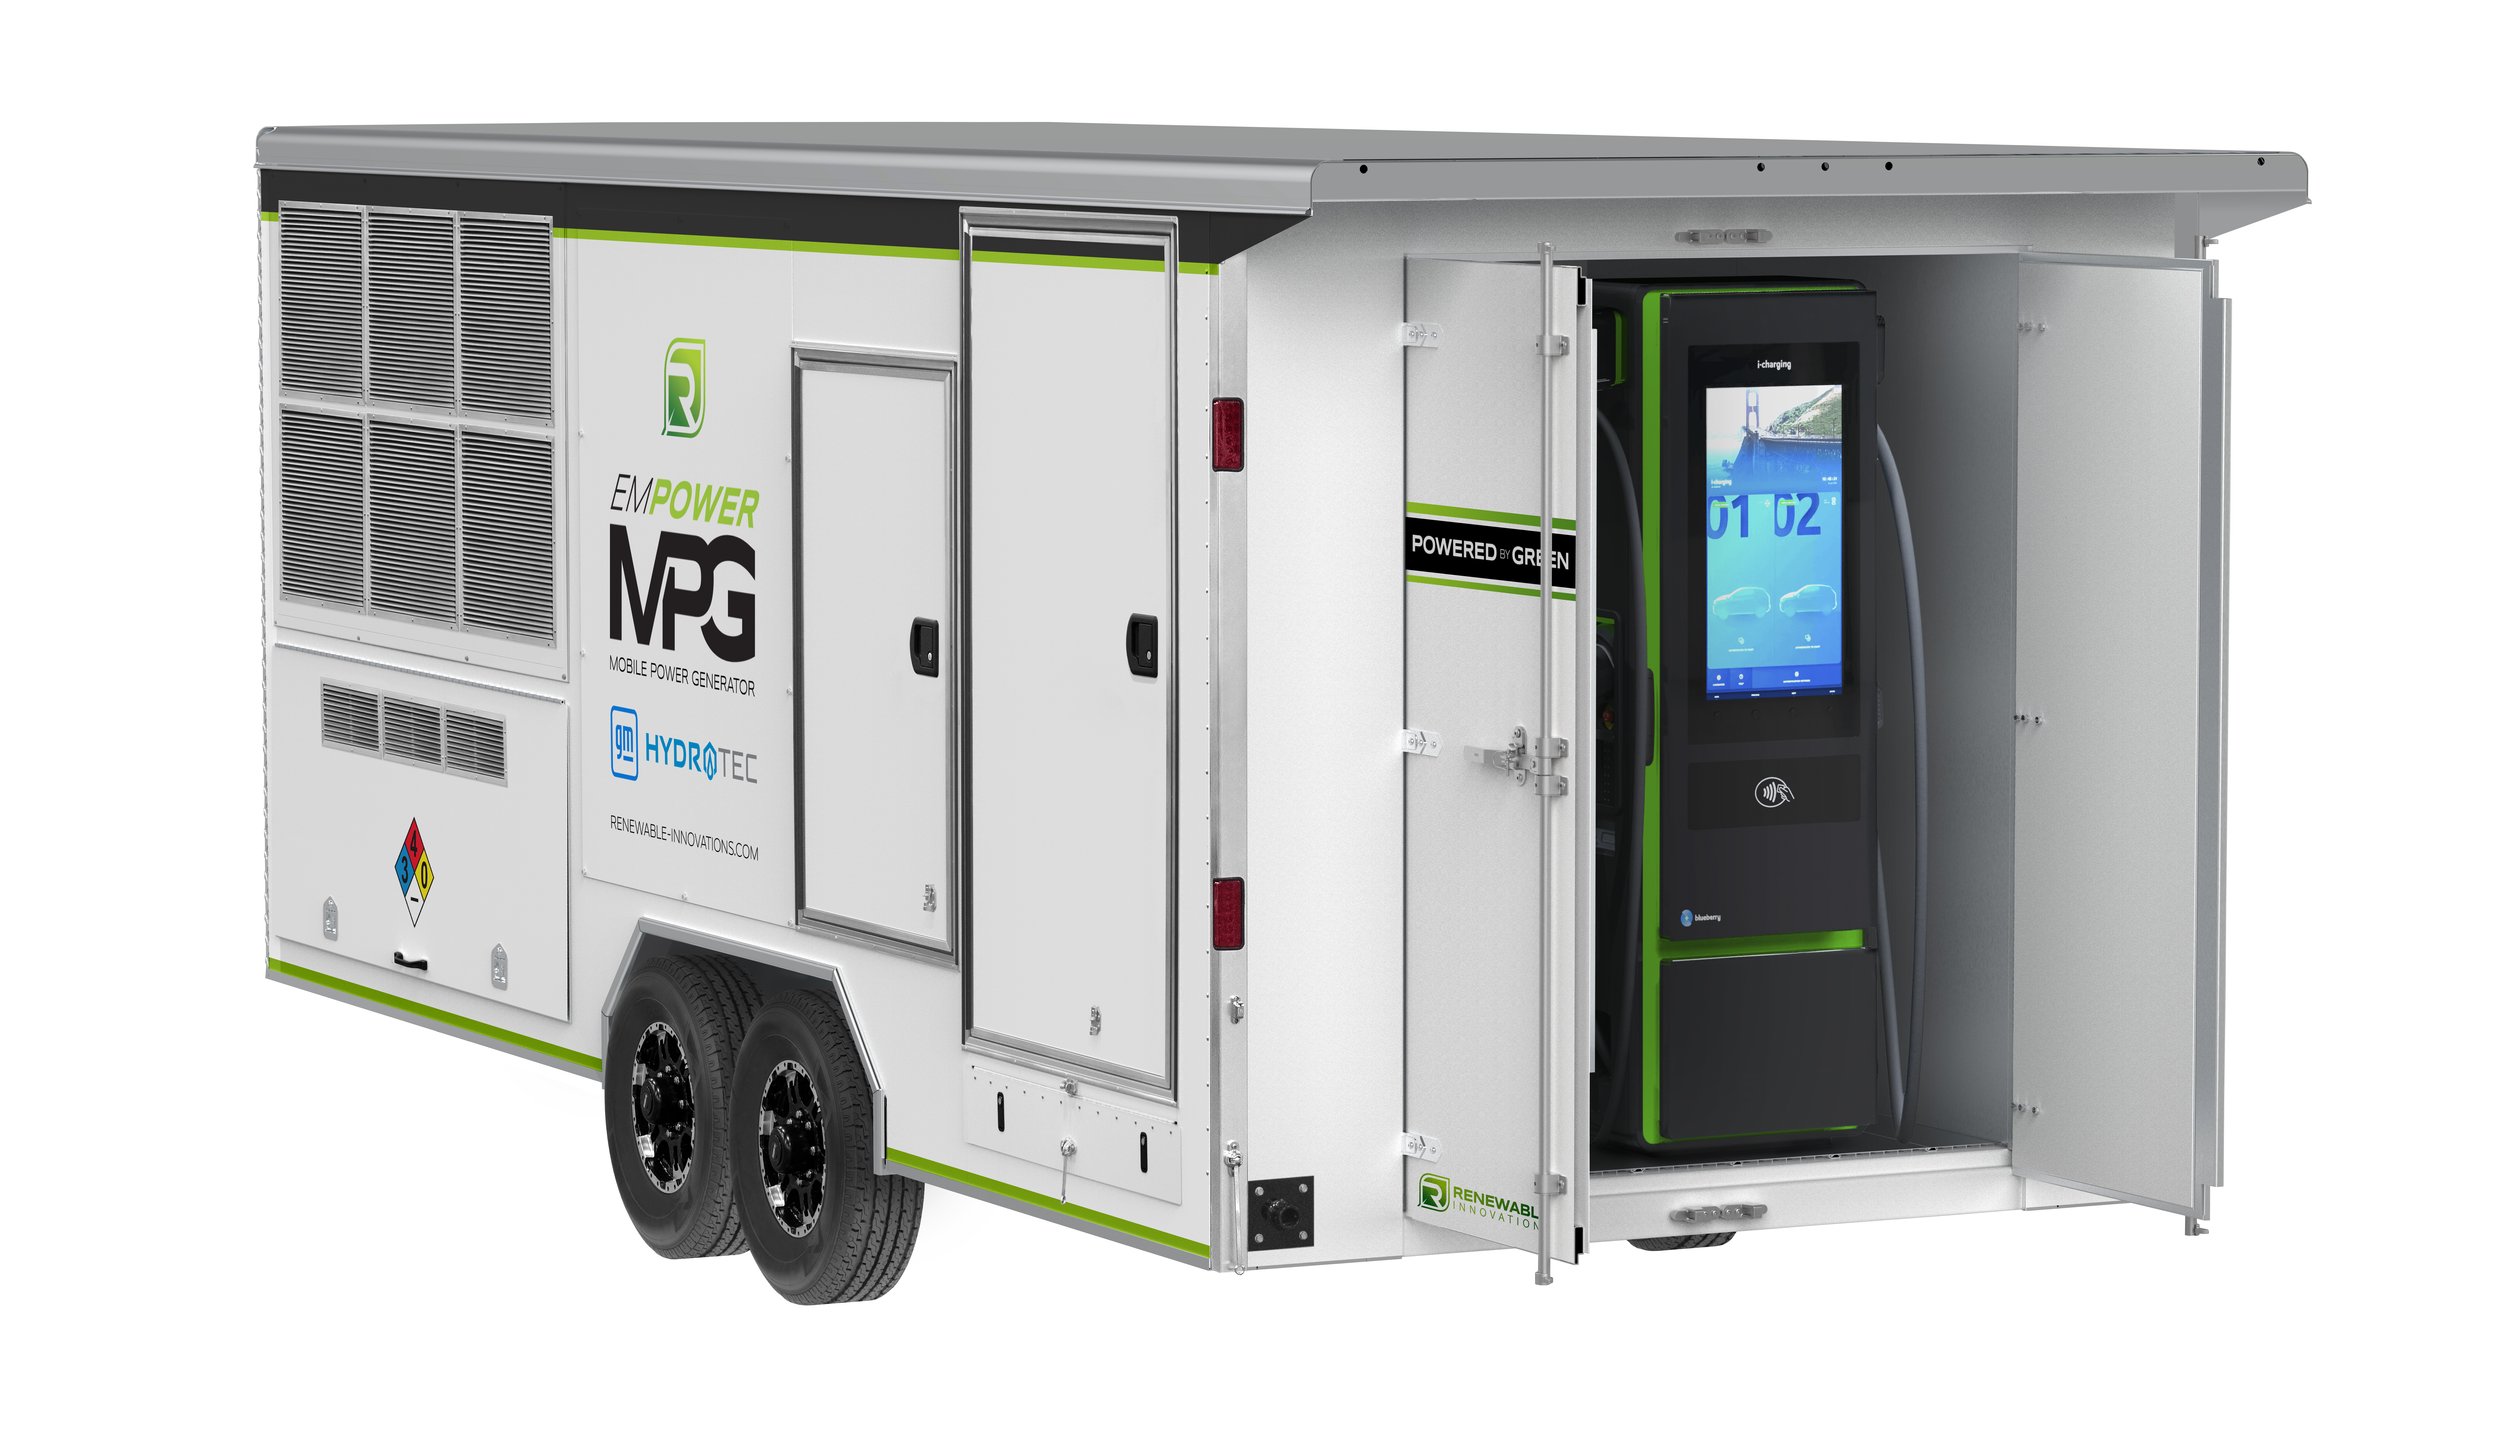 MPG - Mobile Power Generator Power by Hydrogen with EV Rapid Charger (Copy)